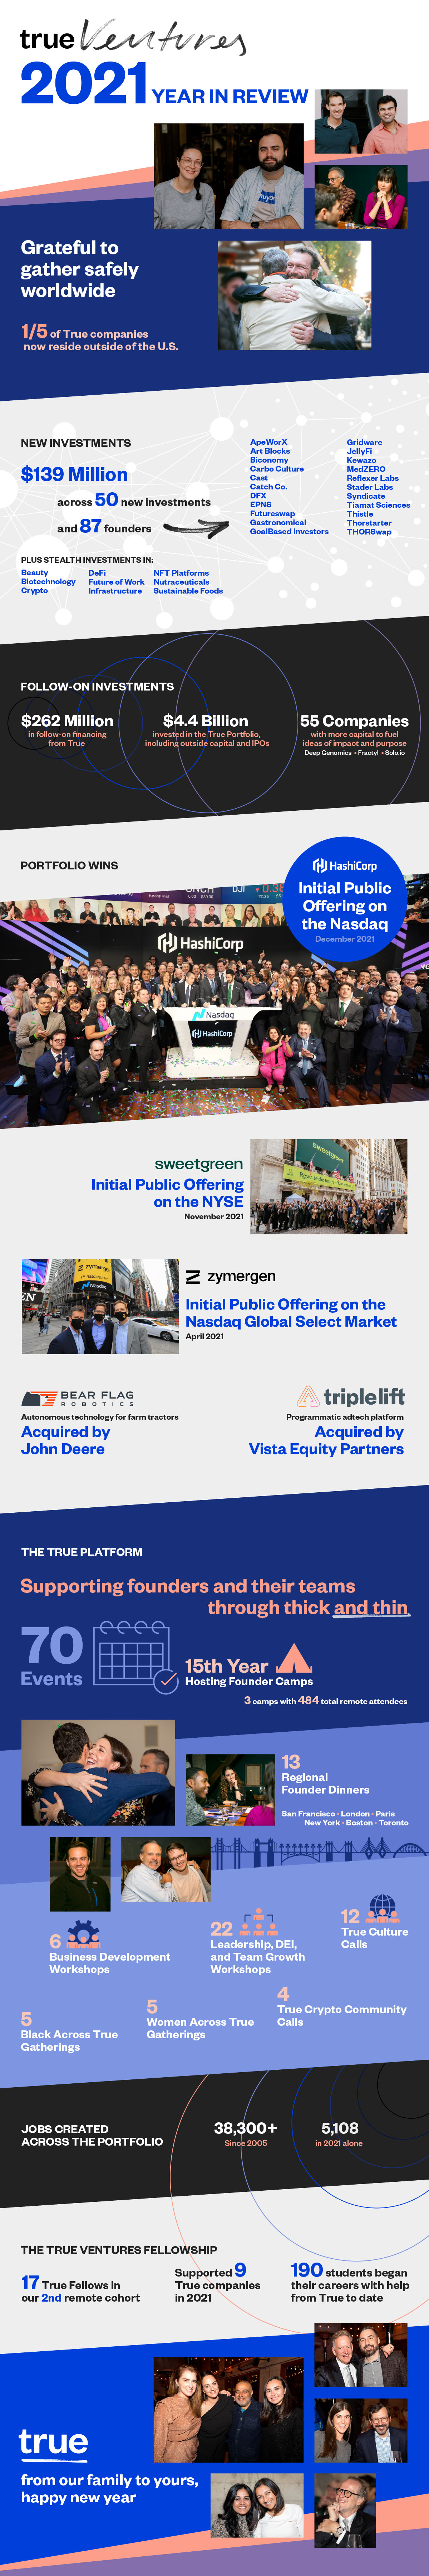 True Ventures 2021 Year in Review Infographic